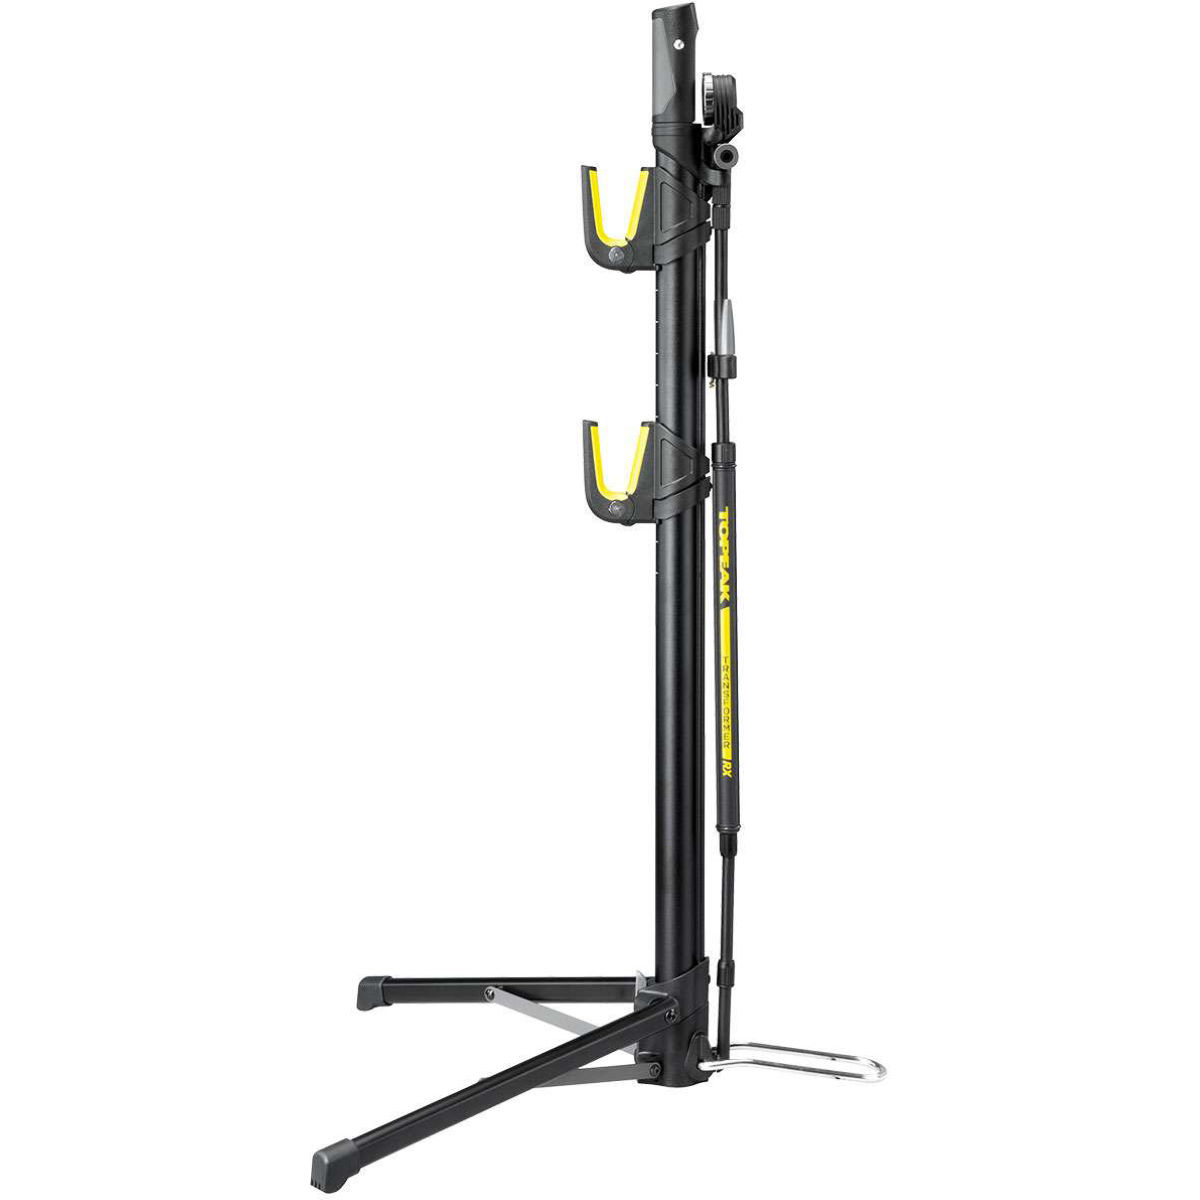 Topeak Transformer RX Pump with stand and Bag - Bombas de pie